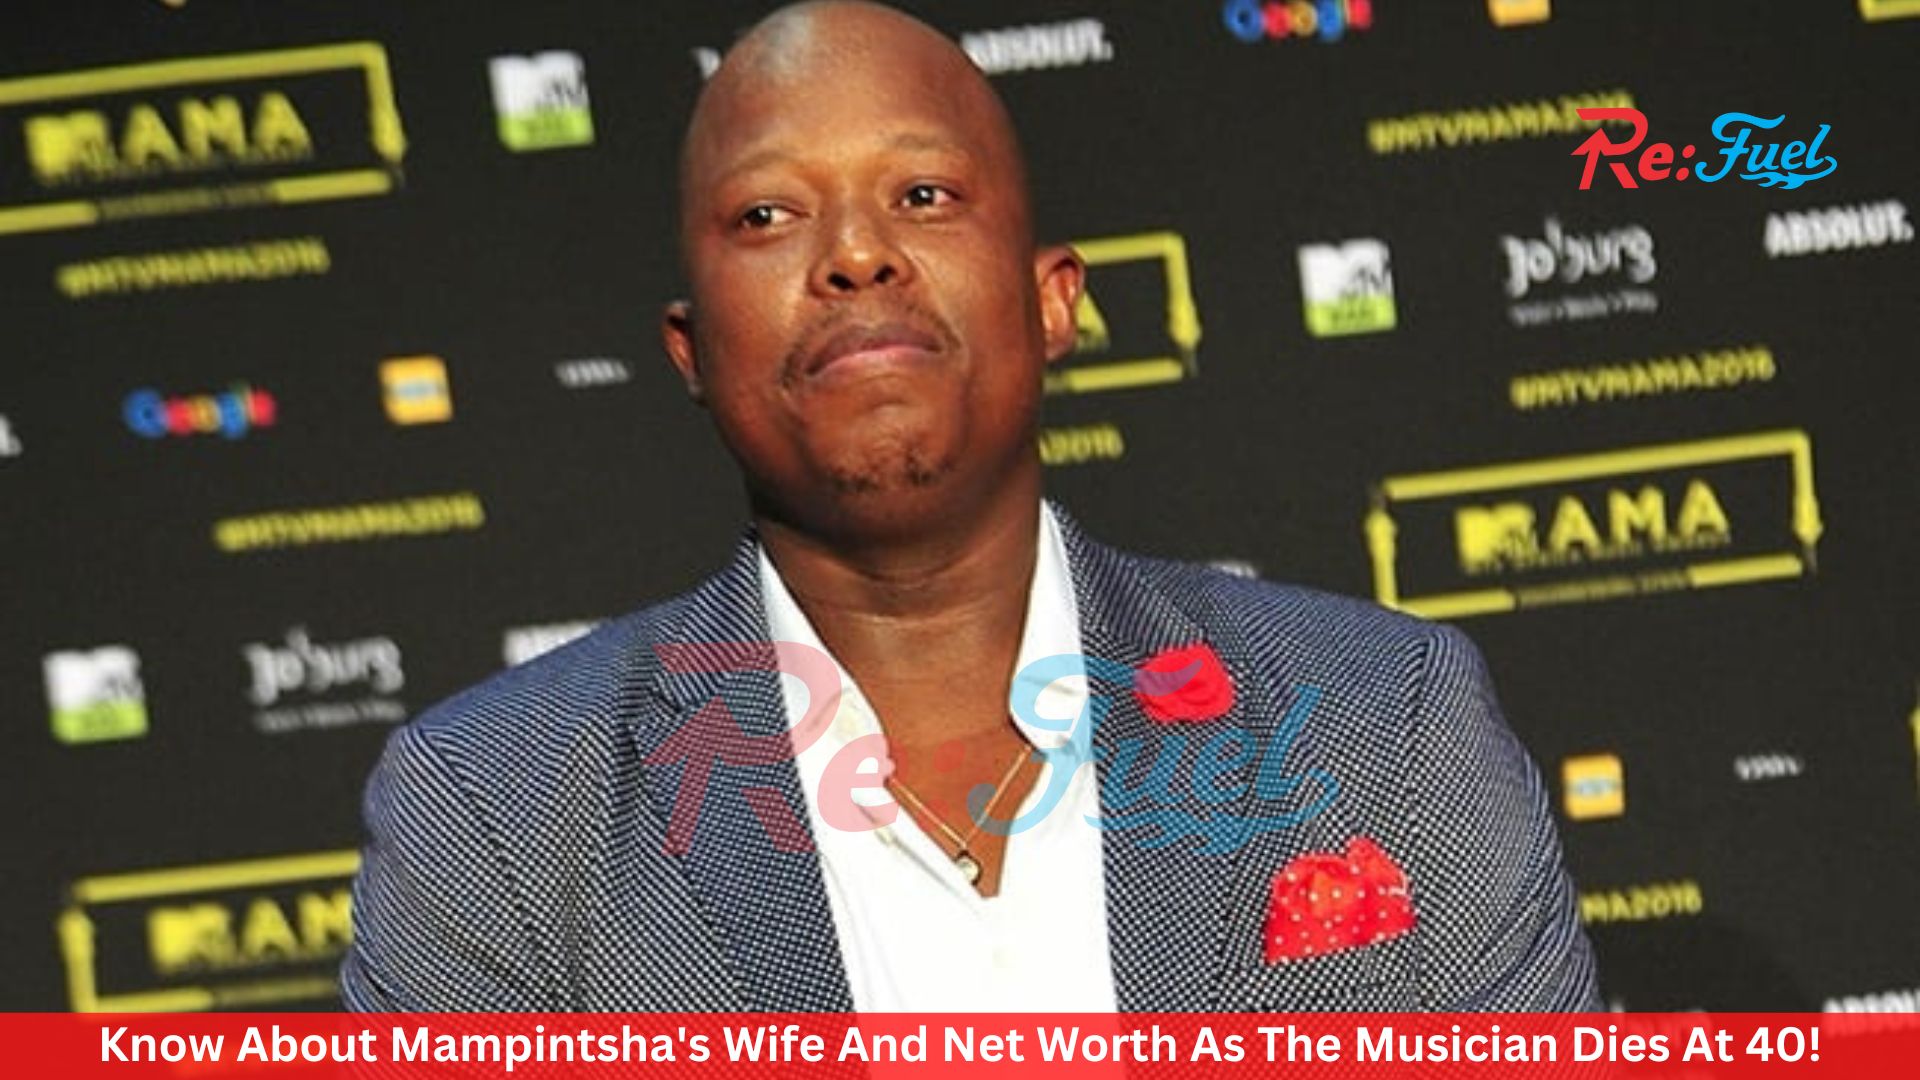 Know About Mampintsha's Wife And Net Worth As The Musician Dies At 40!